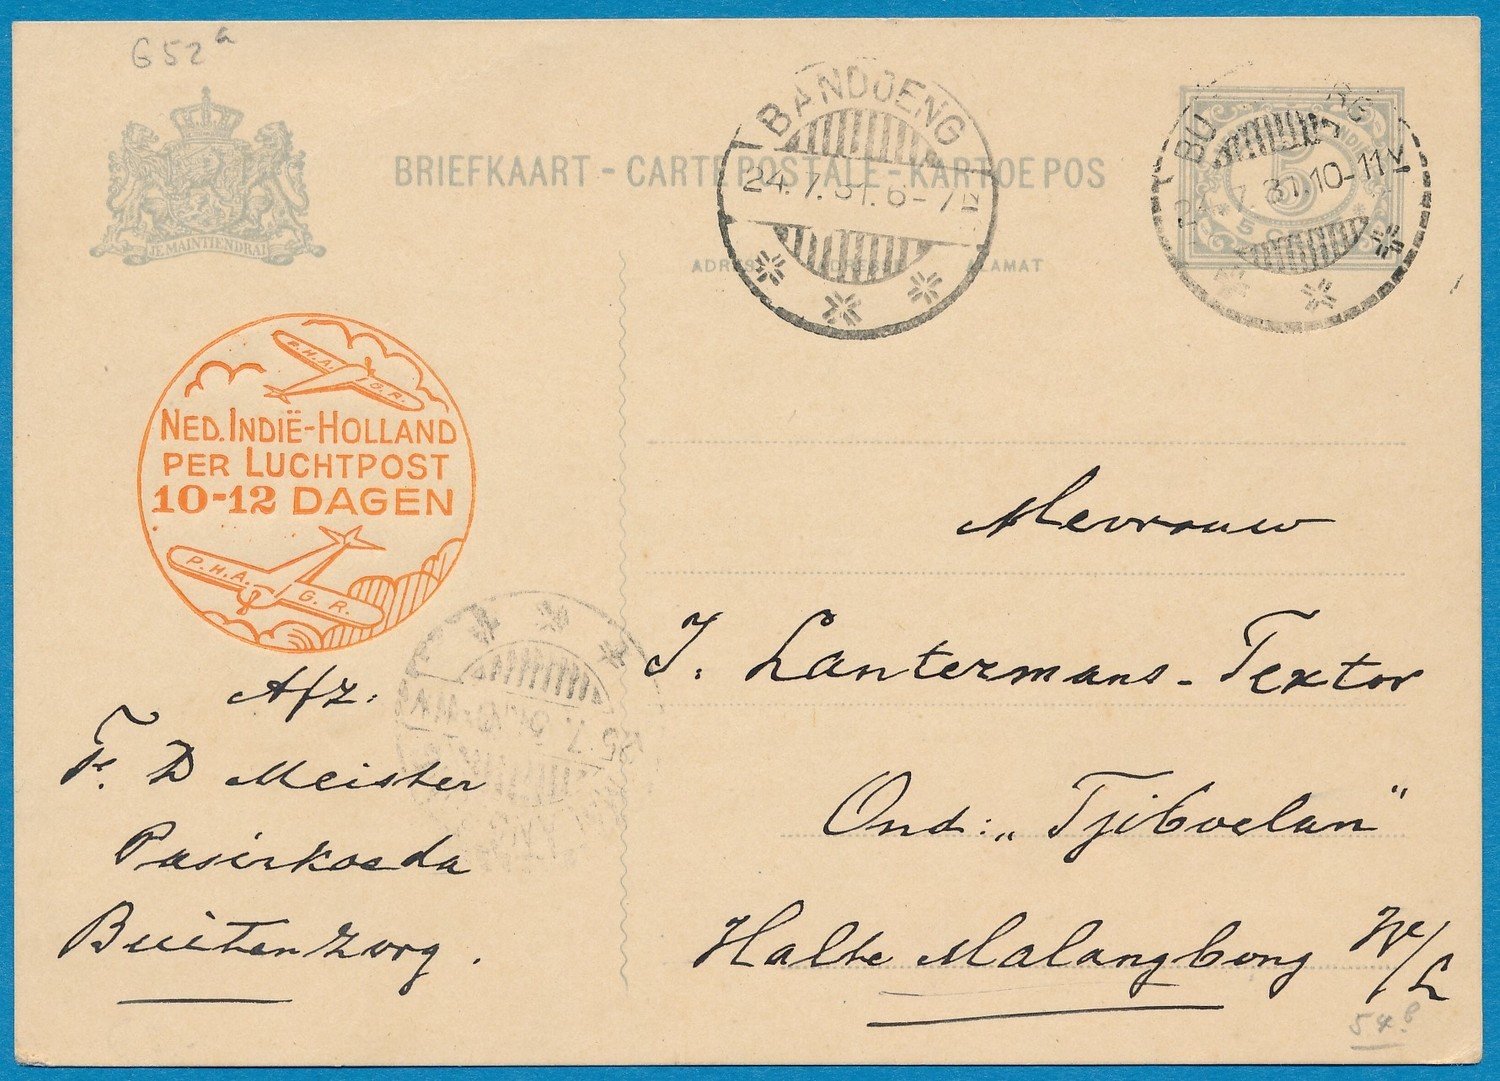 NETHERLANDS EAST INDIES card 1931 Buitenzorg